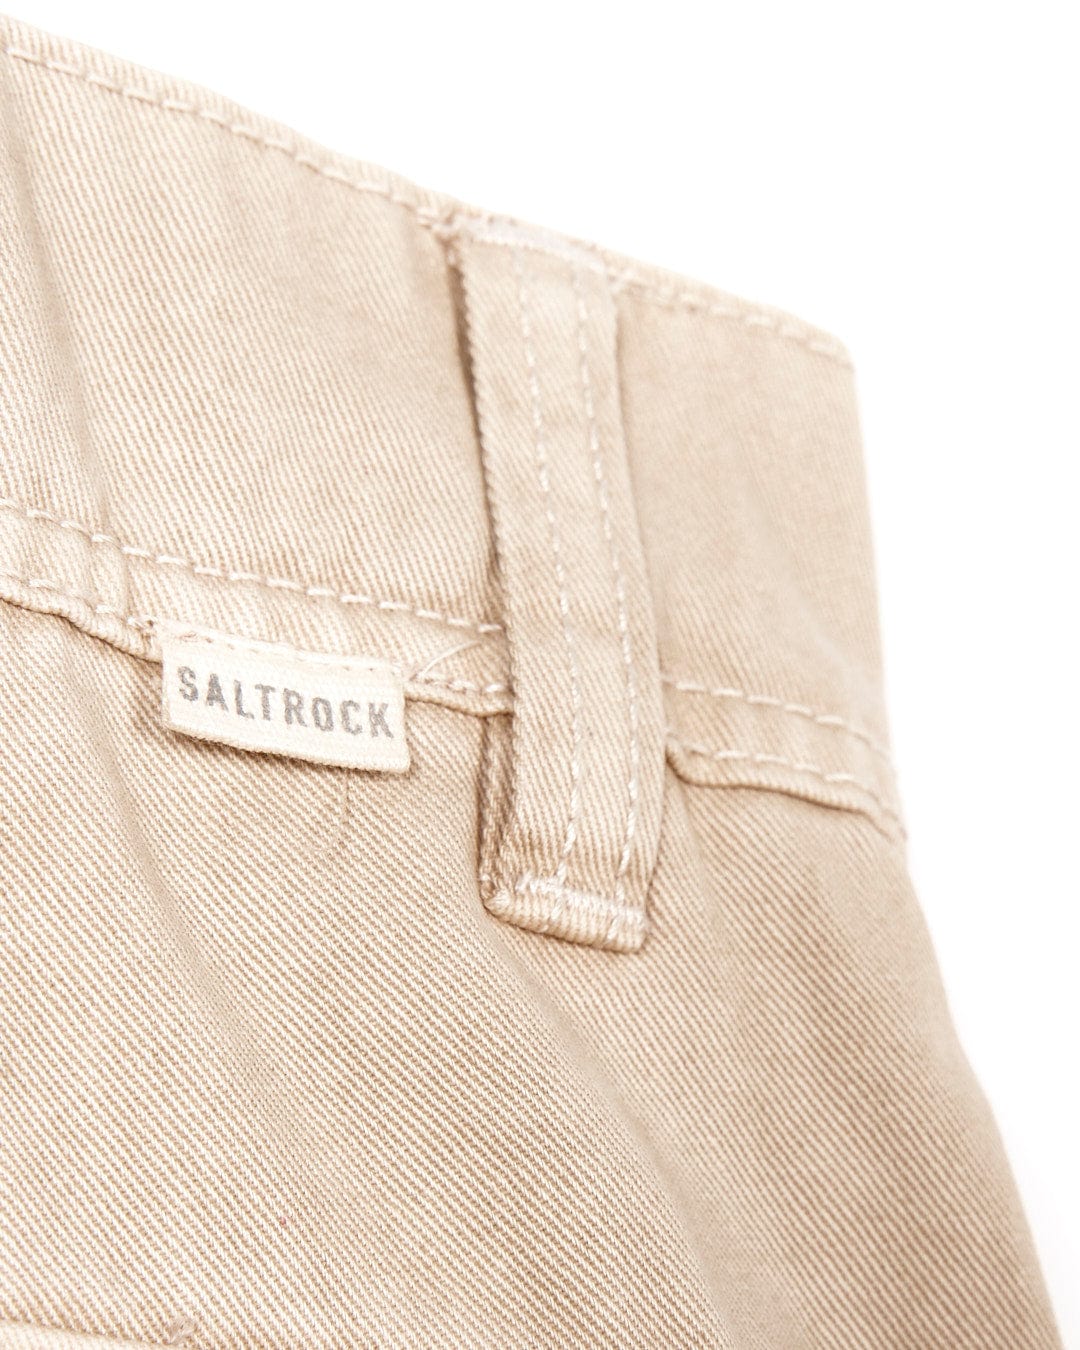 A pair of Godrevy - Mens Cargo Trousers - Cream with the word Saltrock on them, perfect for outdoor adventures.